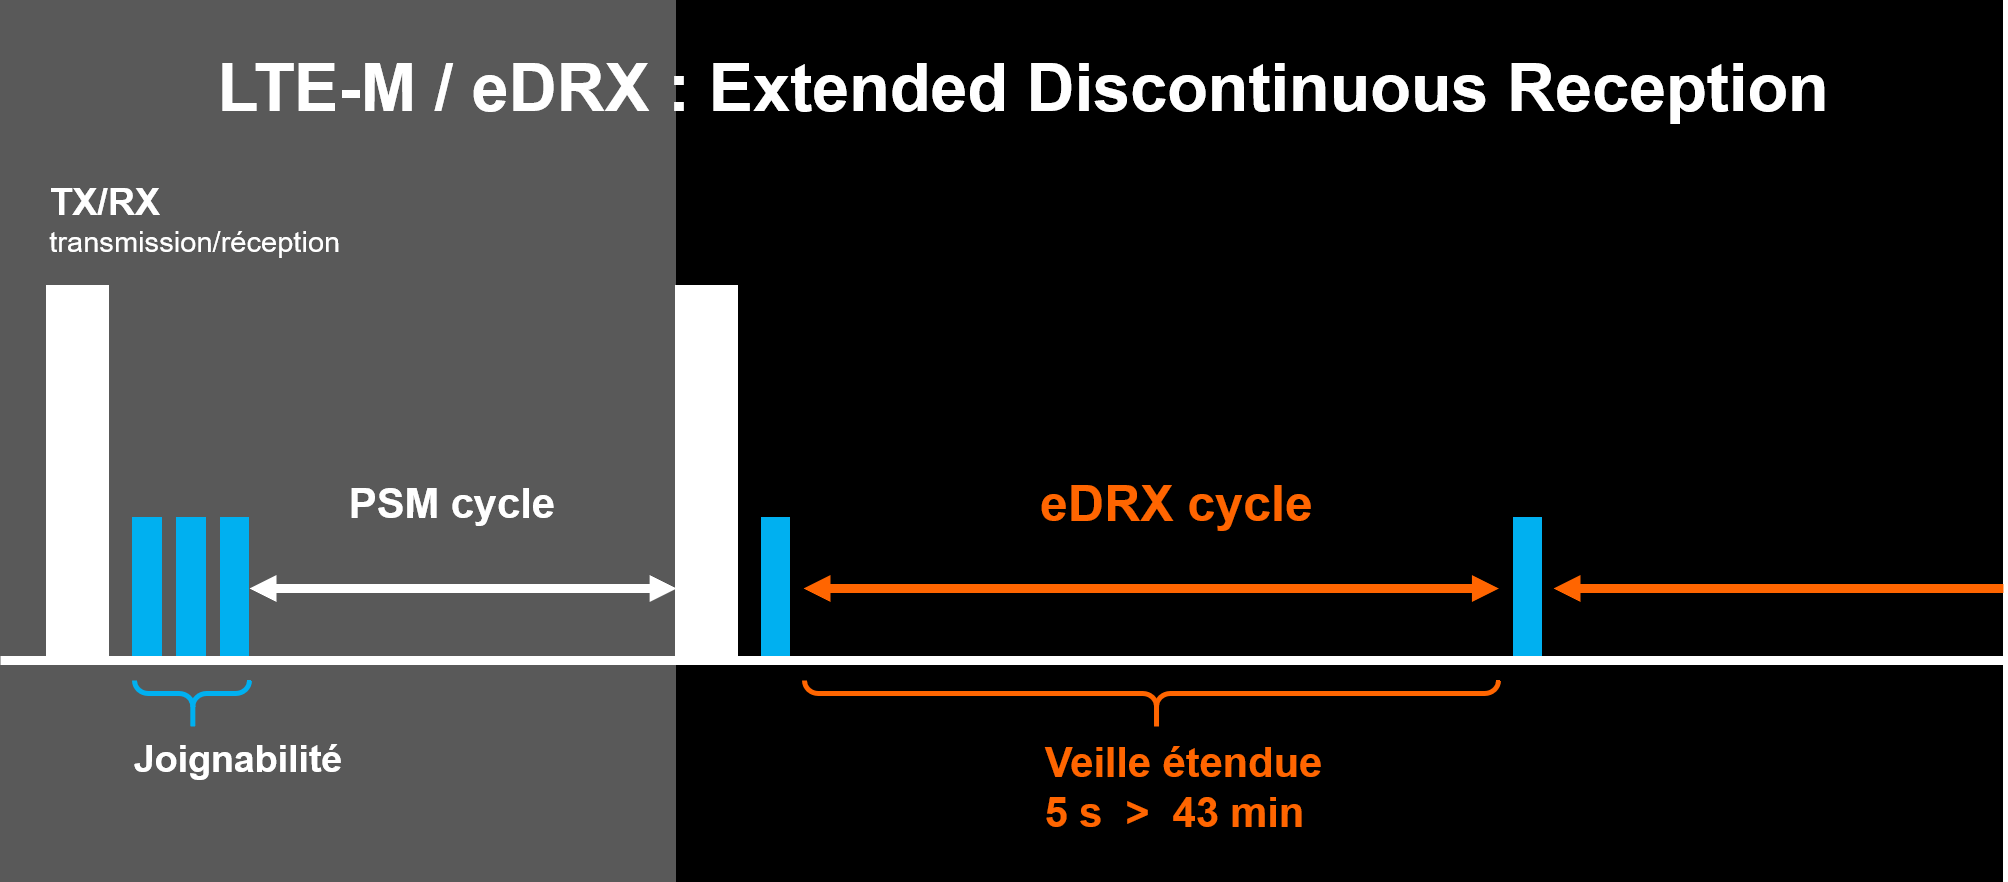 eDRX : Extended Discontinuous Reception